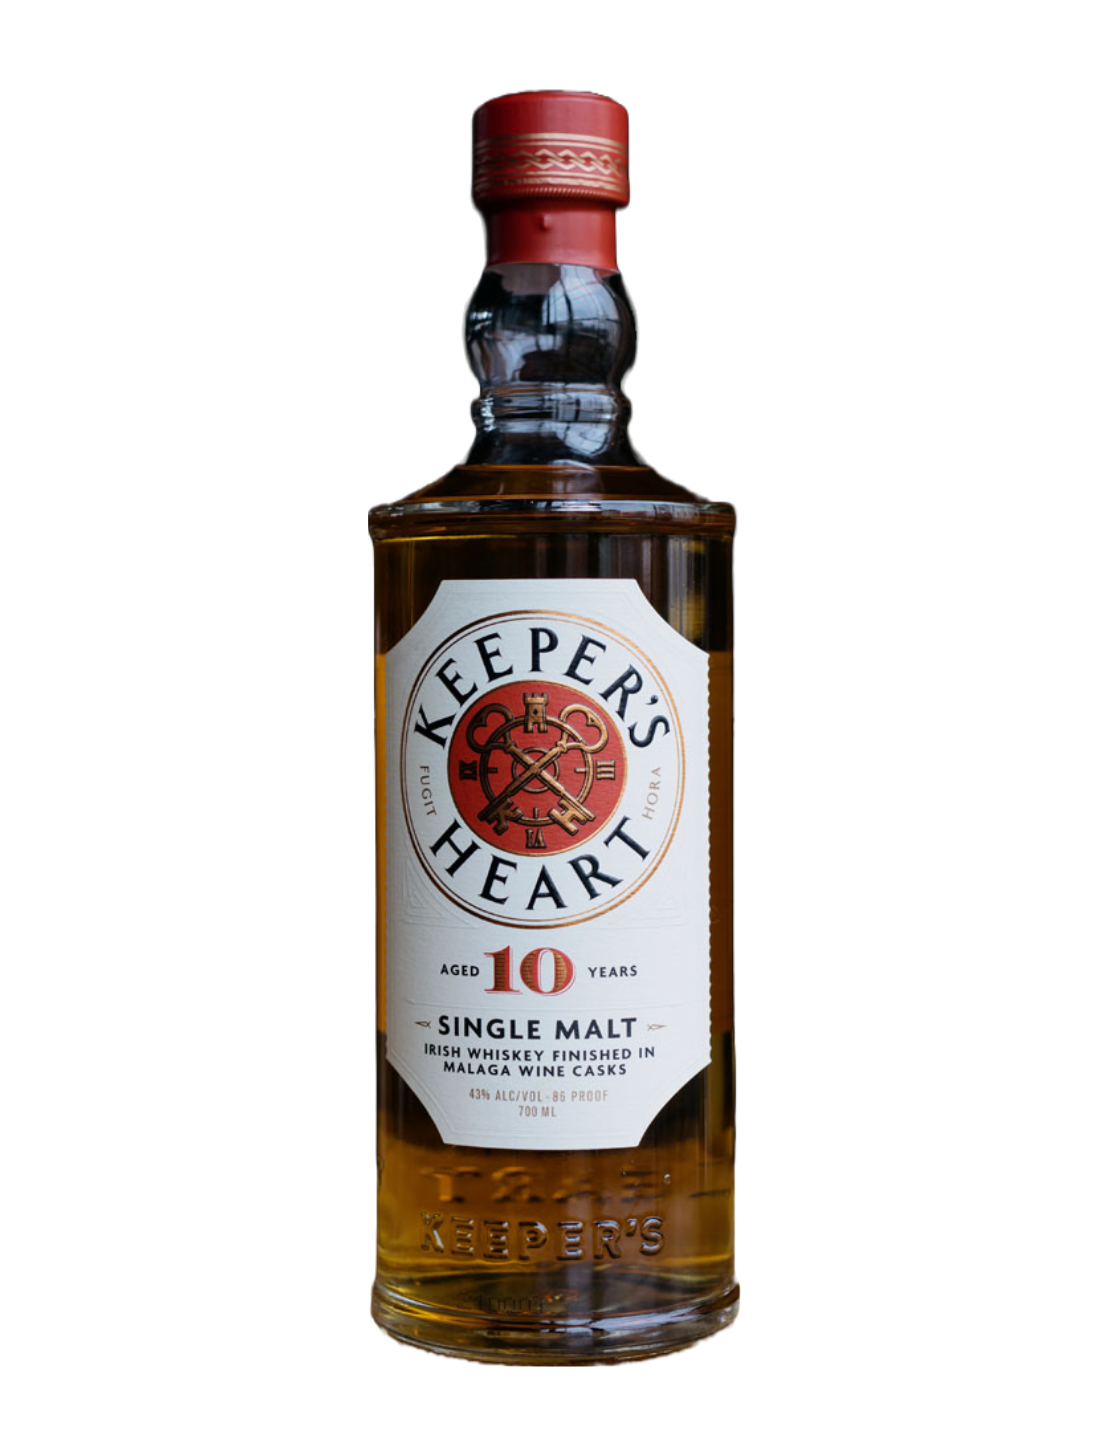 An elegant bottle of Keeper's Heart 10 Year Old Irish Single Malt Whiskey in front of a plain white background